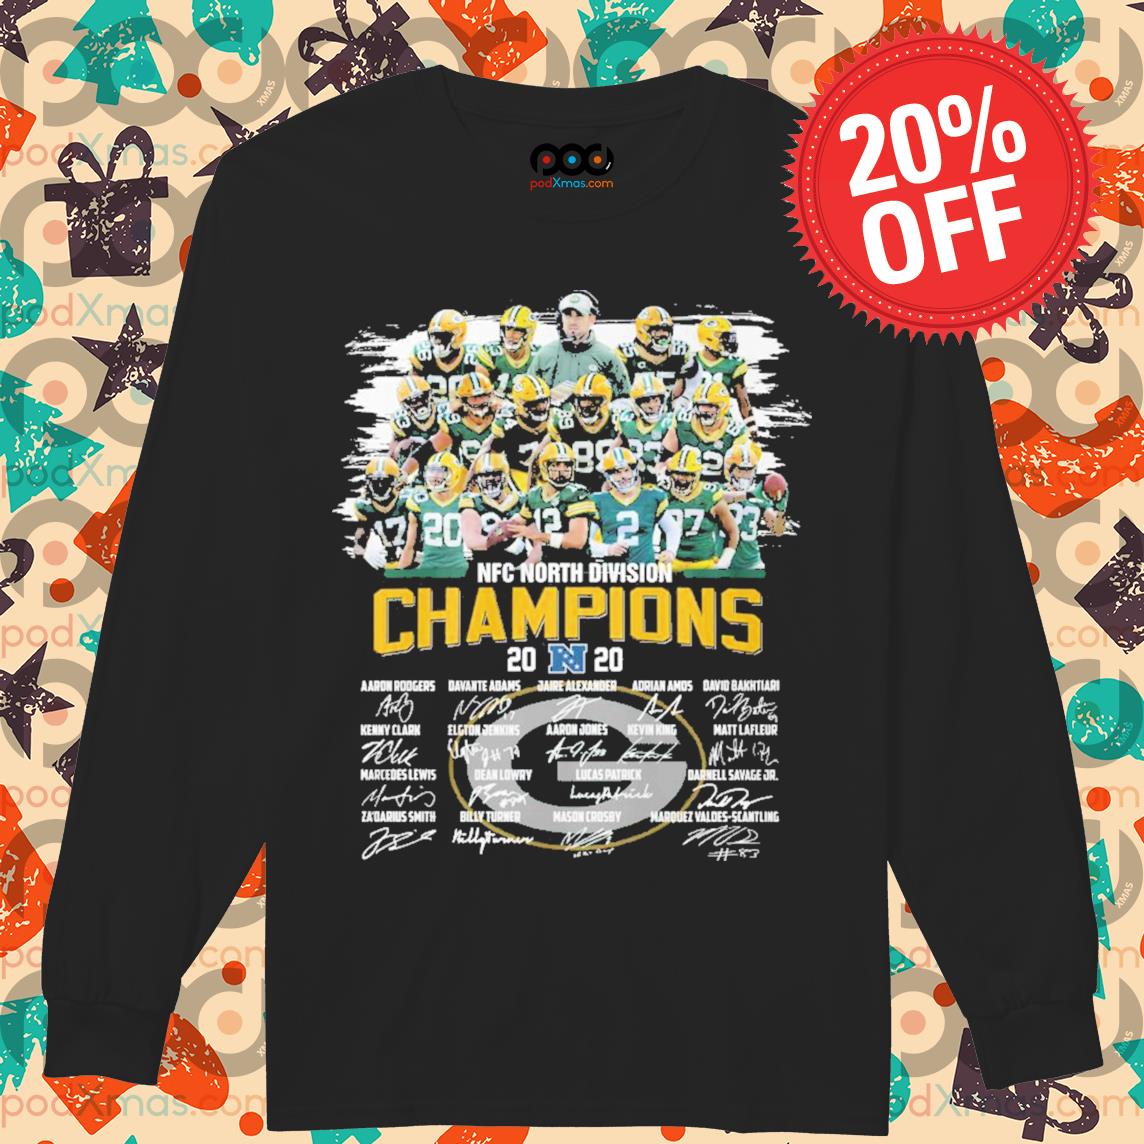 Green Bay Packers 2020 Division Champs Long Sleeved T-Shirt at the